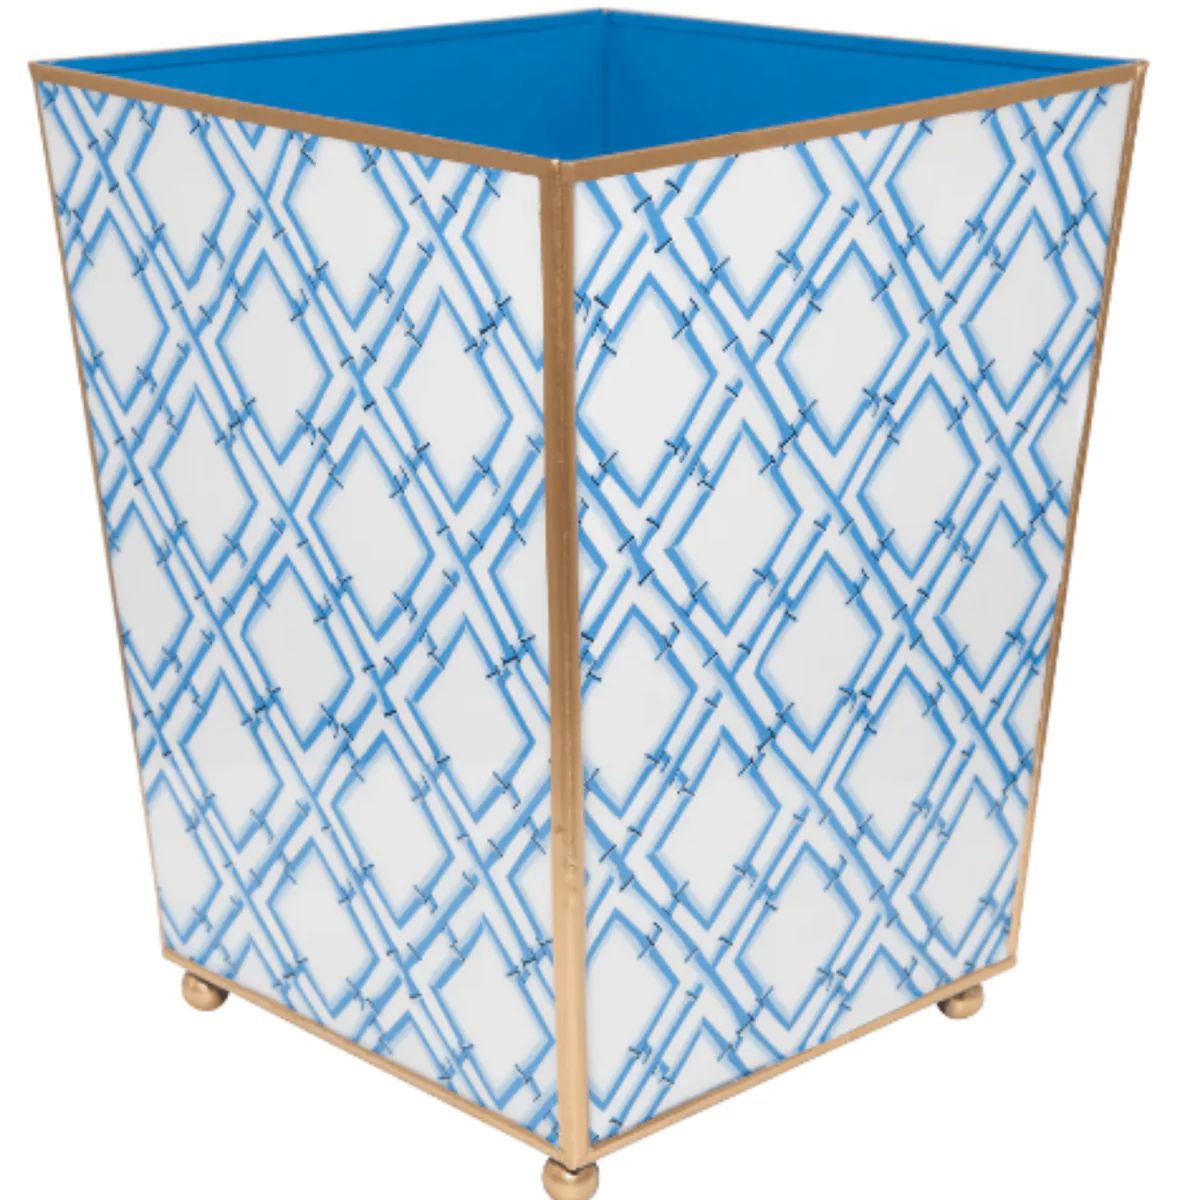 Blue & White Cane Enameled Square Wastebasket | The Well Appointed House, LLC